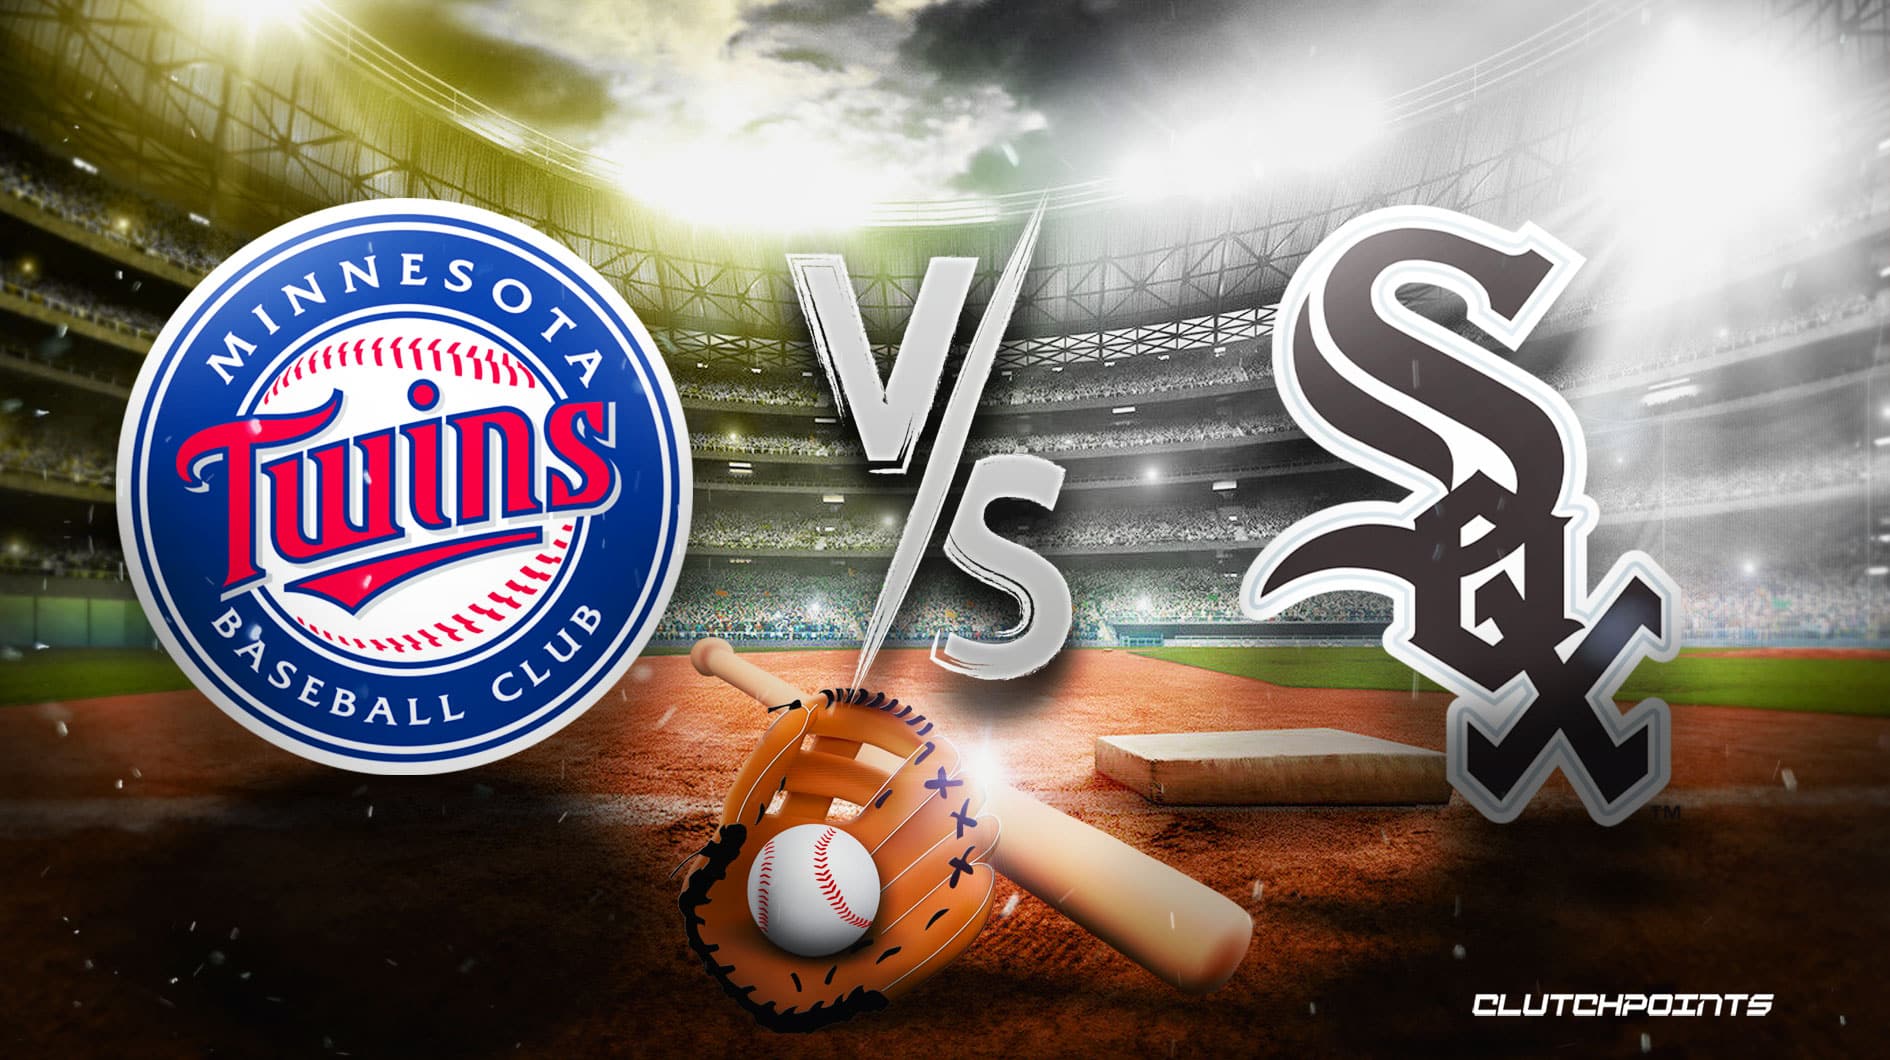 How to Watch the Twins vs. White Sox Game: Streaming & TV Info